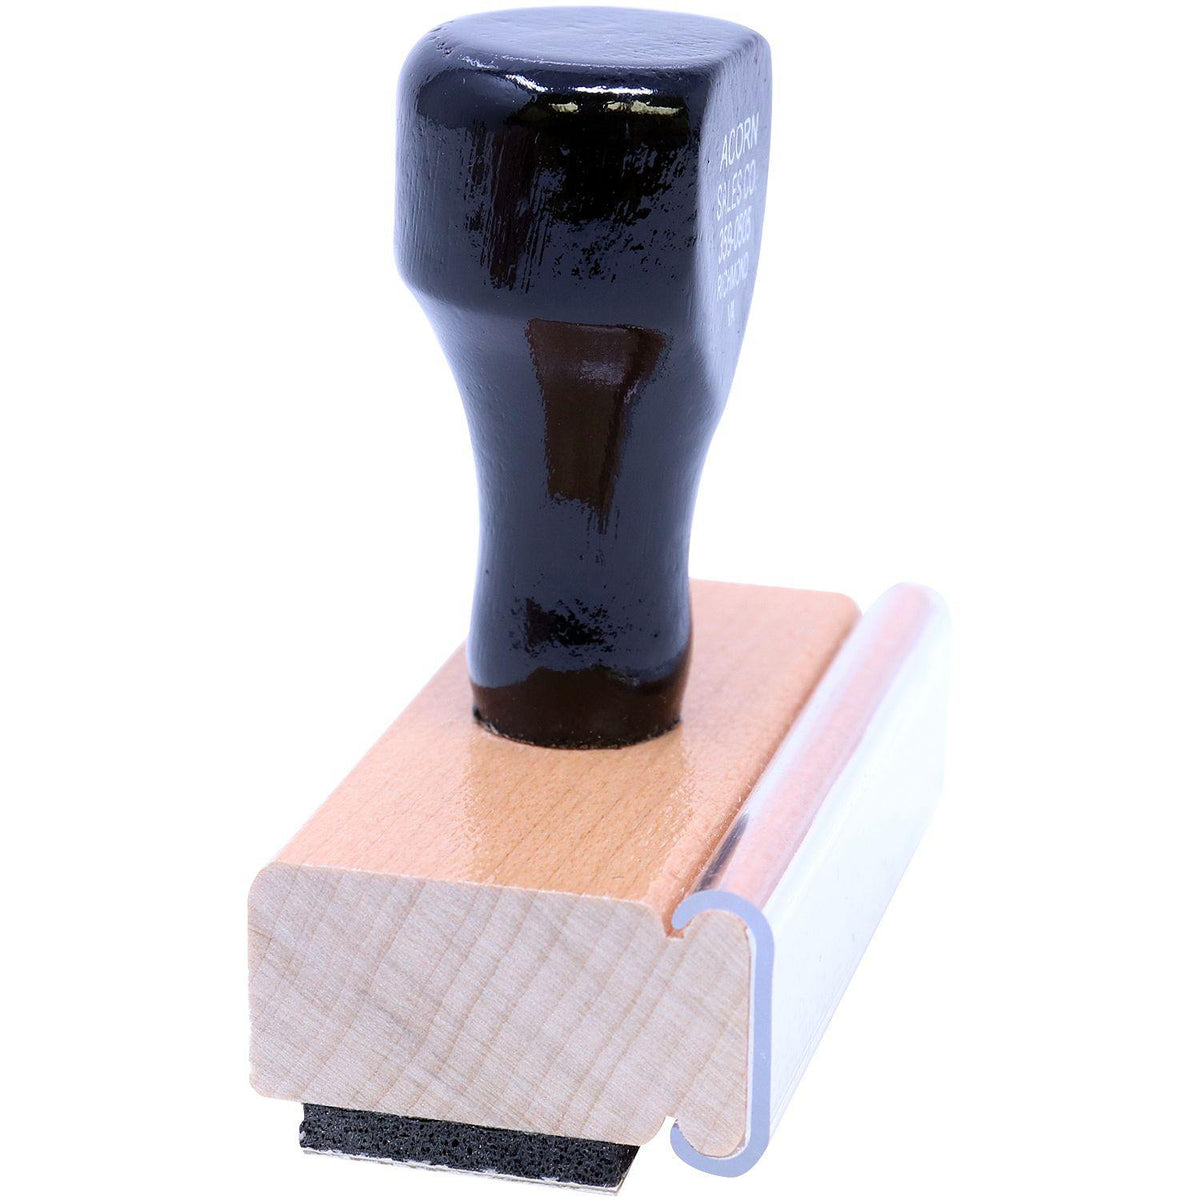 Perfect Rubber Stamp - Engineer Seal Stamps - Brand_Acorn, Impression Size_Small, Stamp Type_Regular Stamp, Type of Use_Teacher